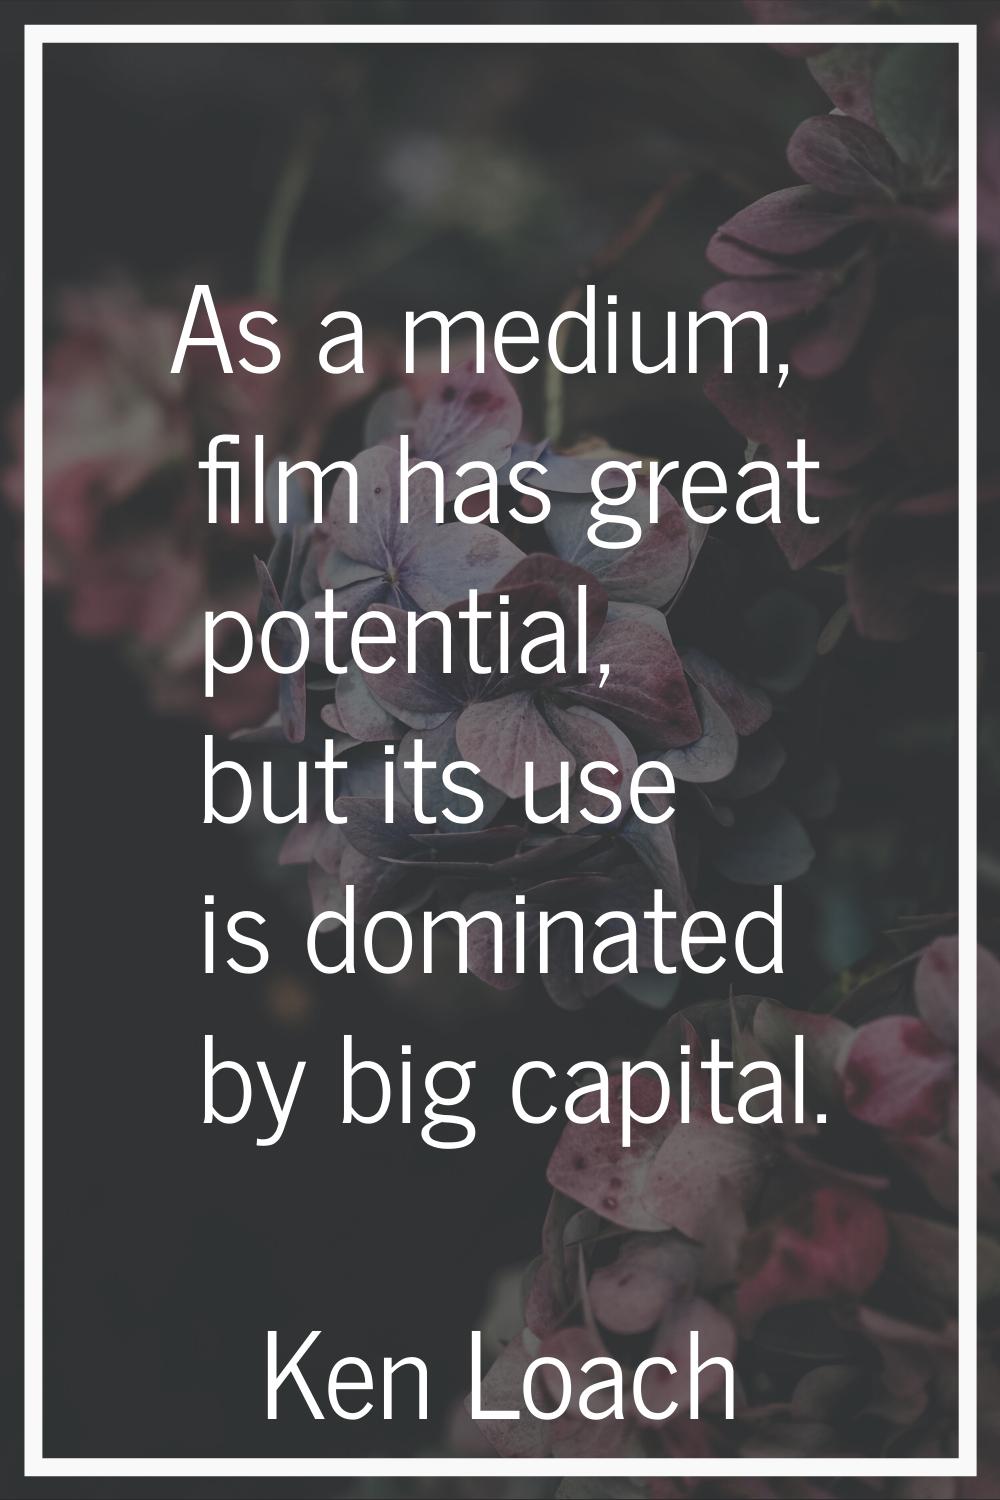 As a medium, film has great potential, but its use is dominated by big capital.